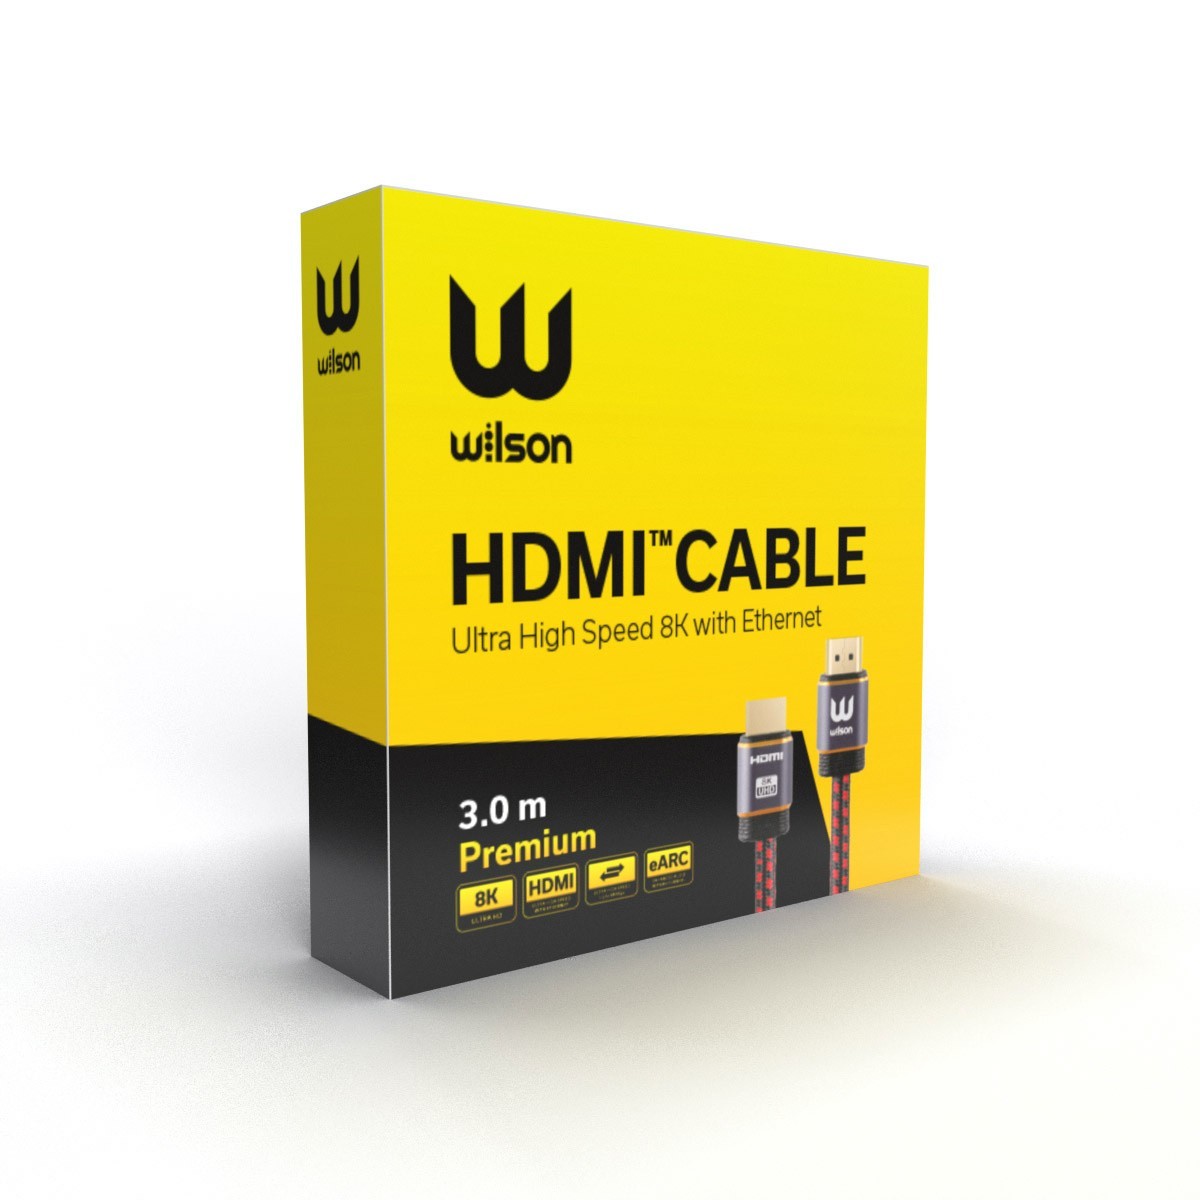 Wilson HDMI Cable 8K 3.0m